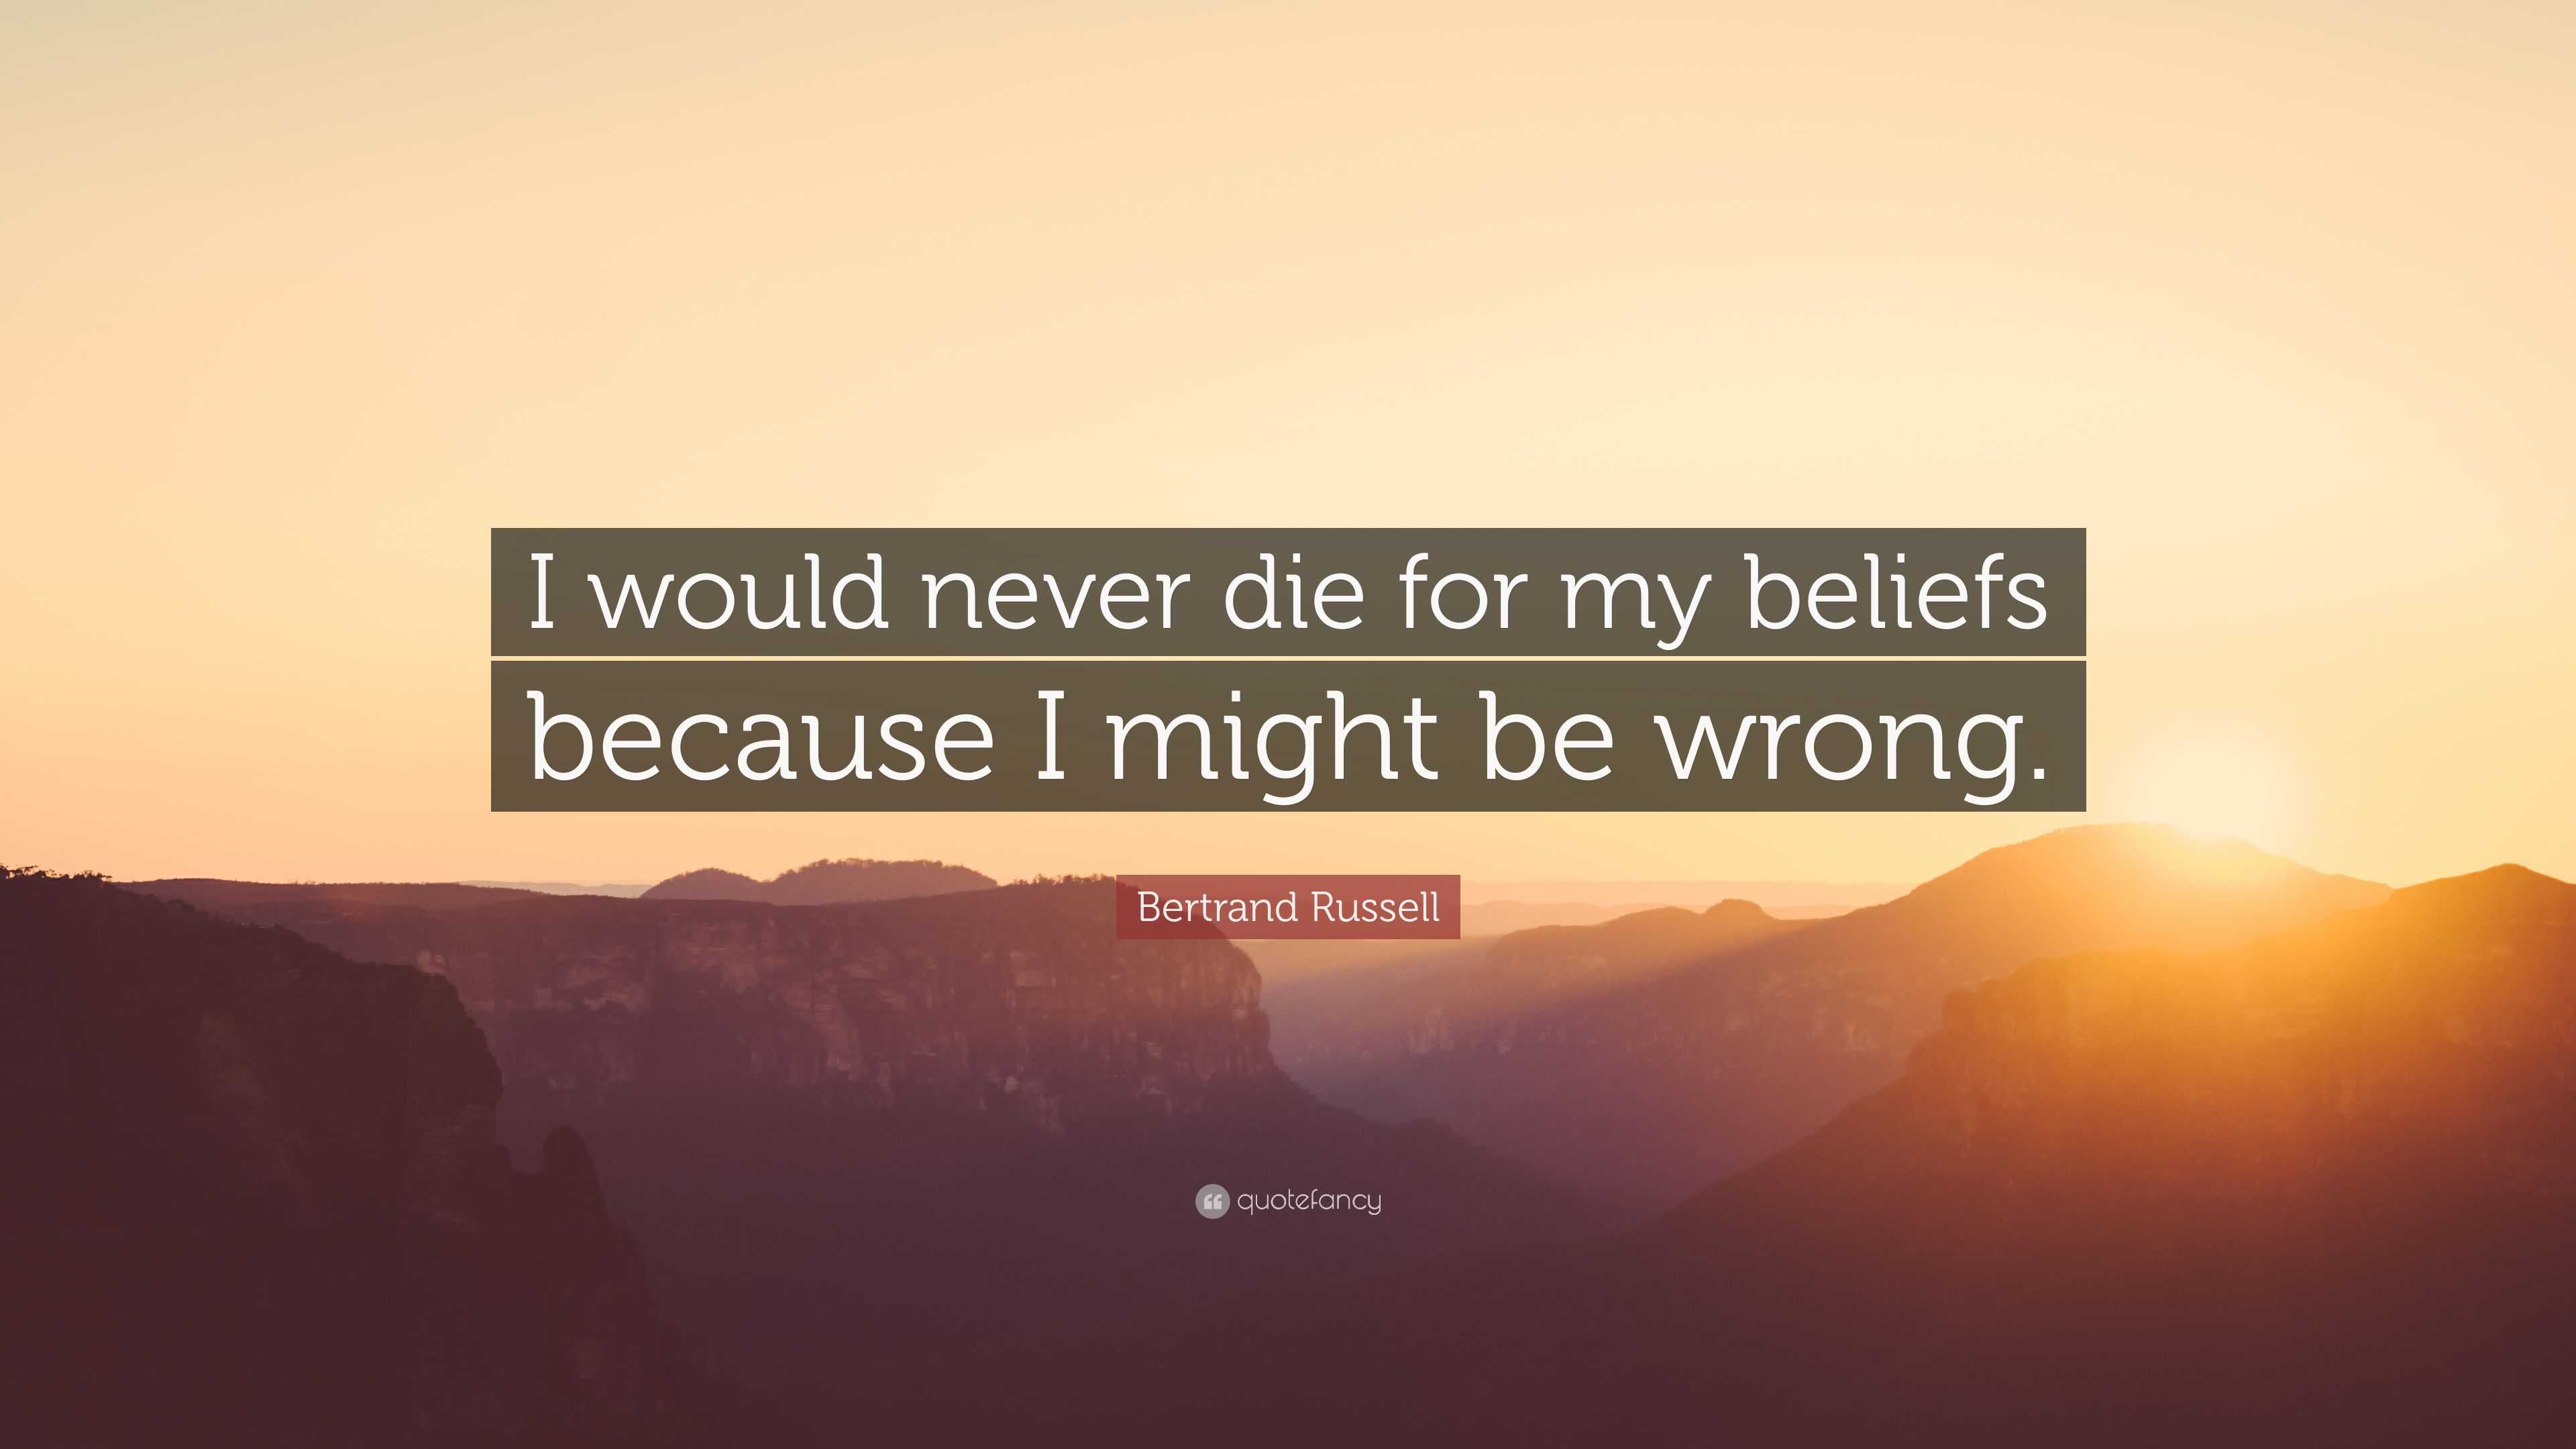 Bertrand Russell Quote: “I would never die for my beliefs because I ...